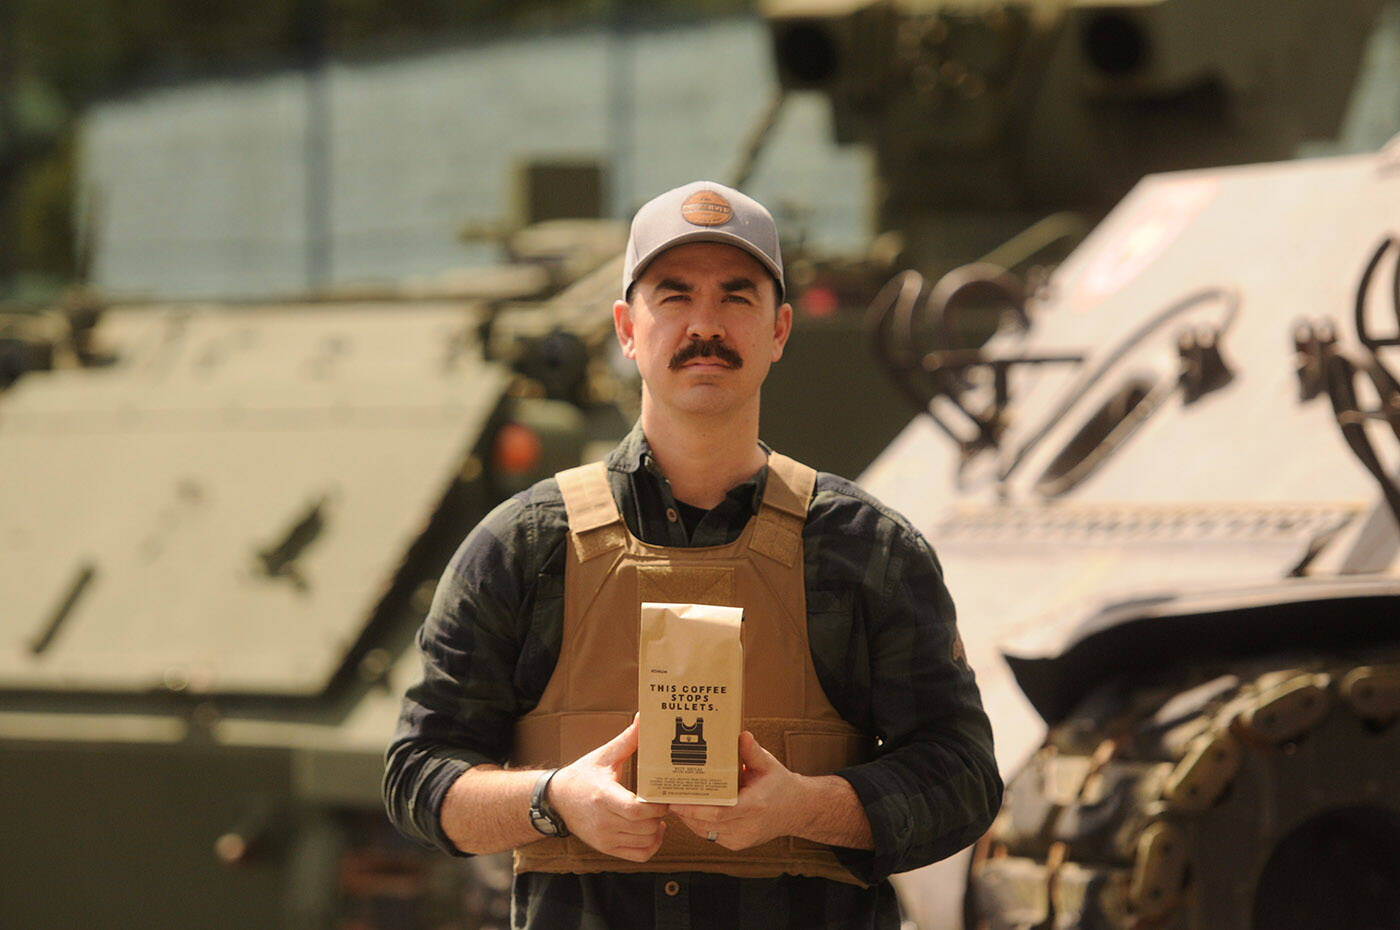 John Lowe is selling coffee to help raise funds for body armour to protect a group of Canadian volunteers in Ukraine. (Jenna Hauck/ Chilliwack Progress)